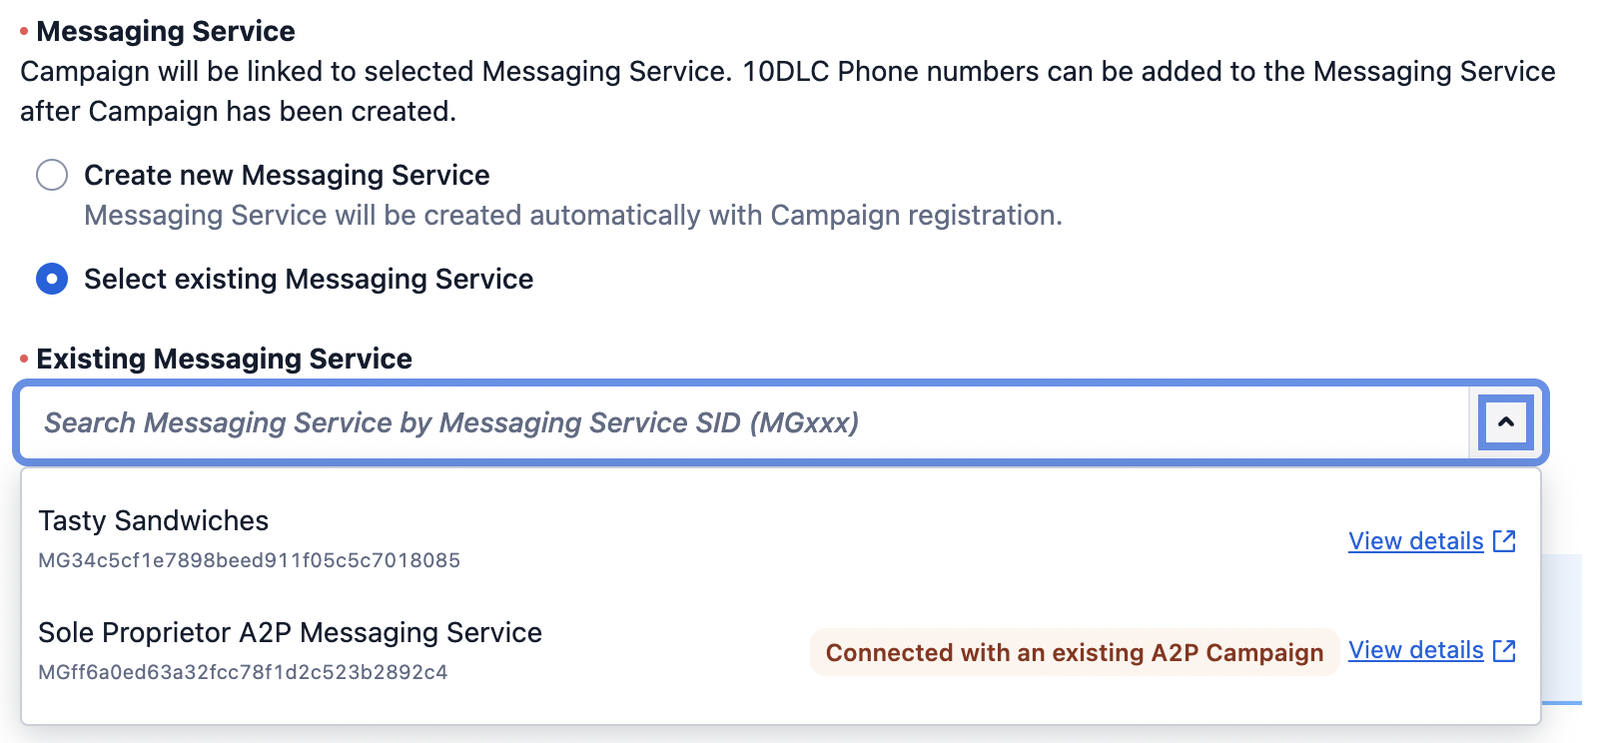 Select existing messaging service.